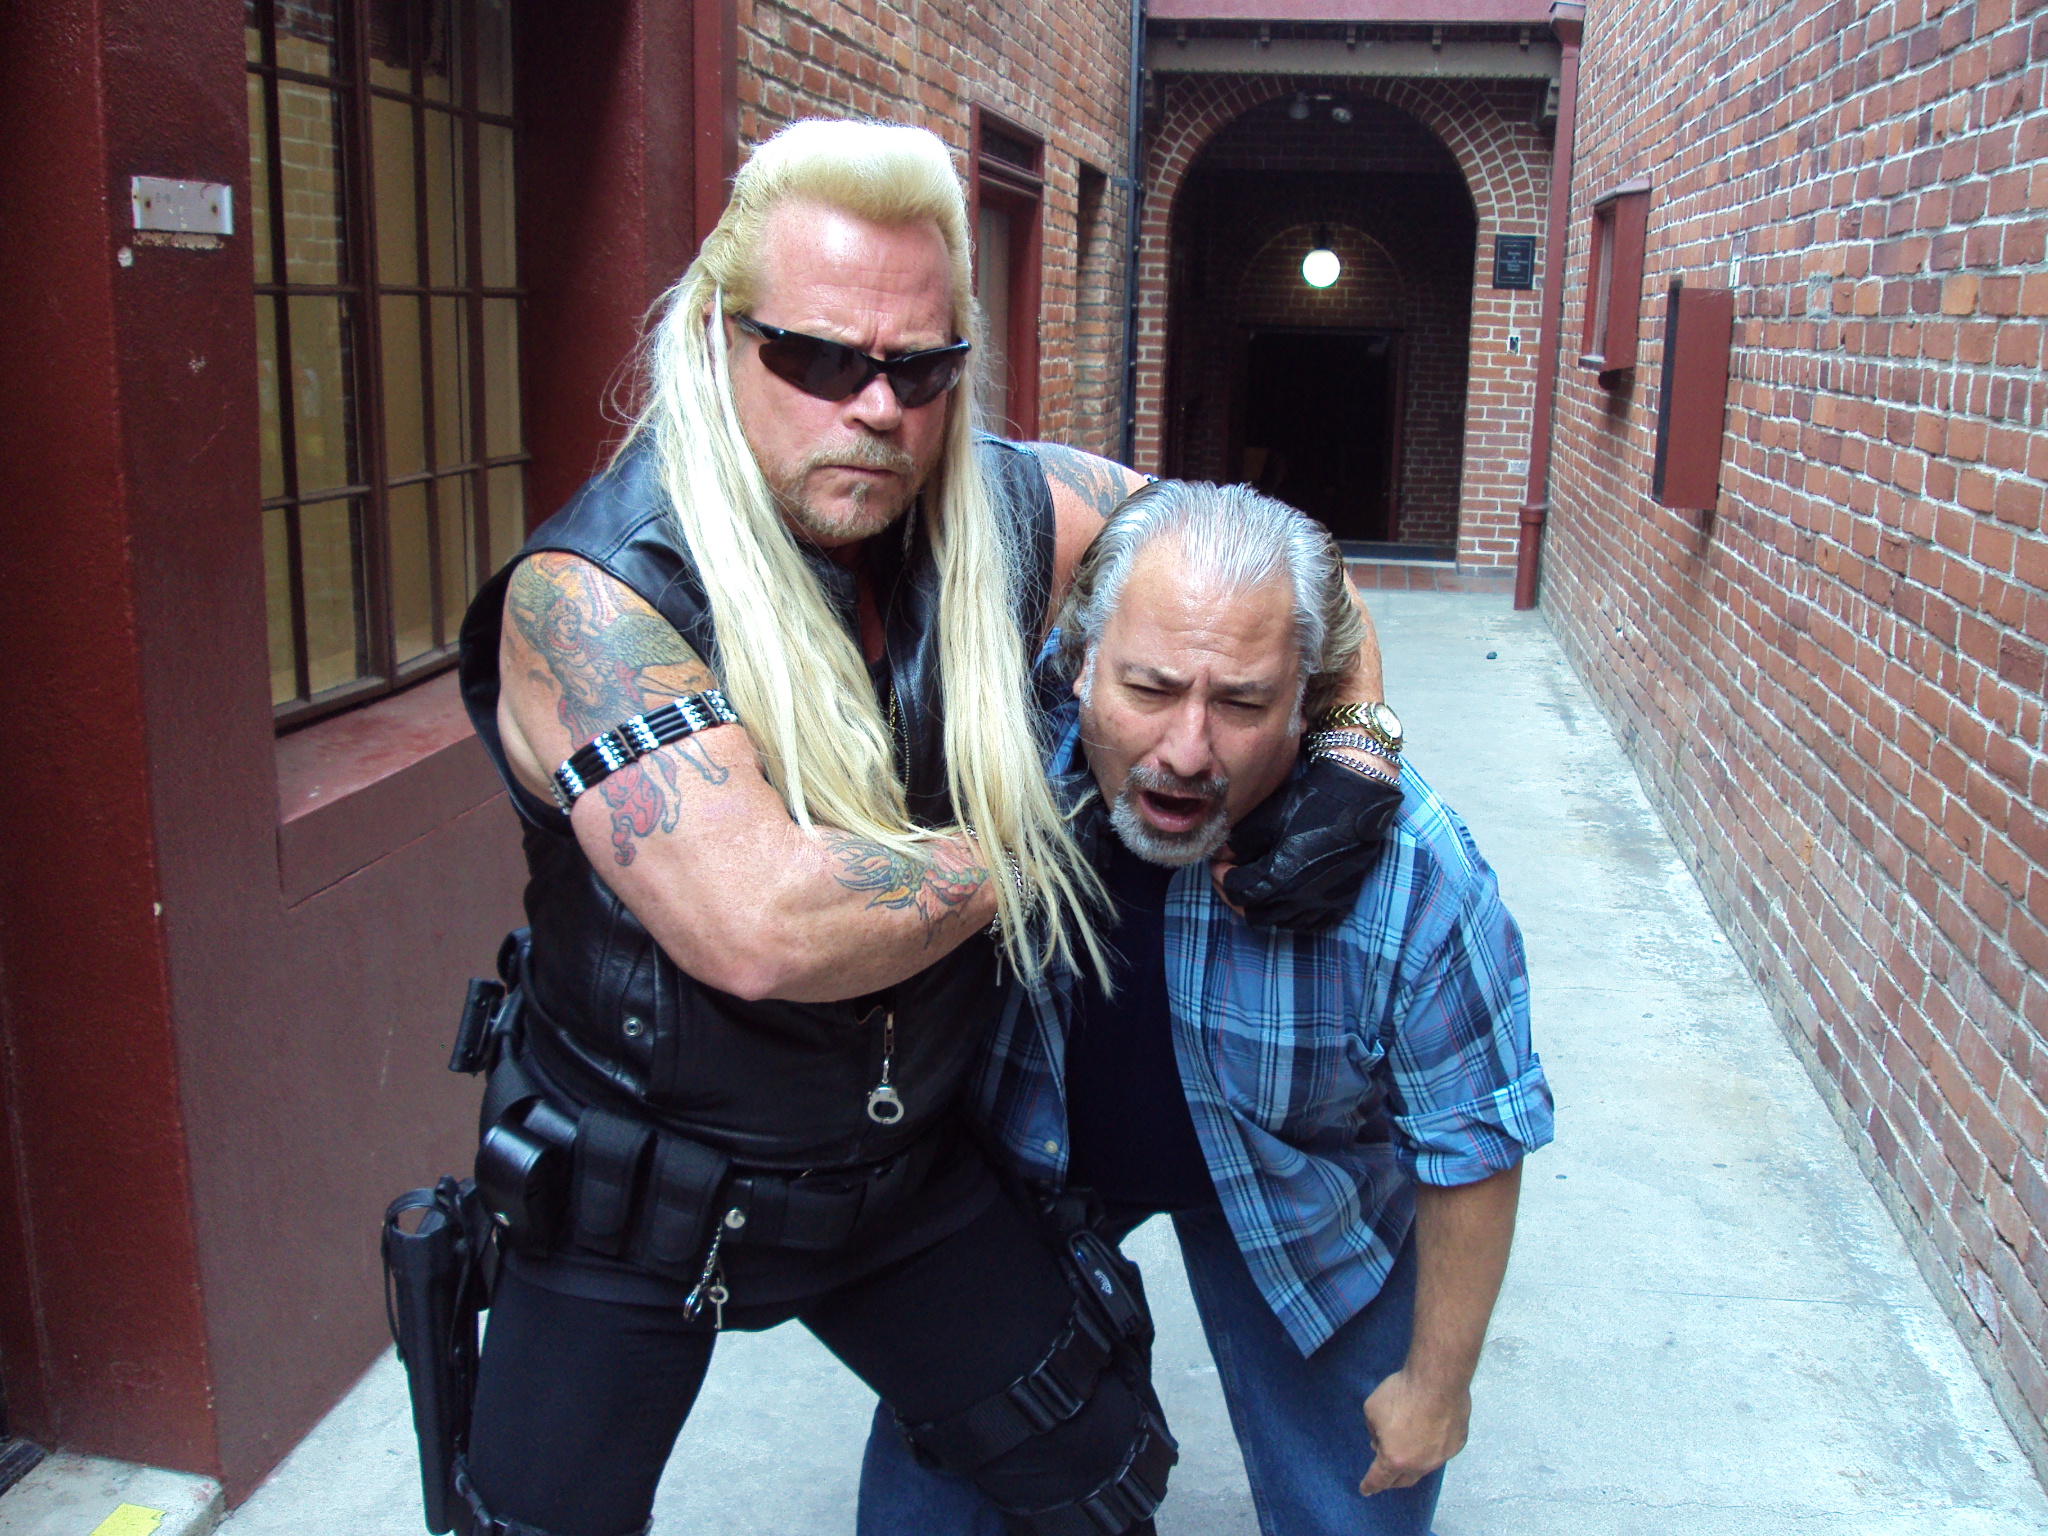 Getting roughed up by the bounty hunter during the Snickers shoot.